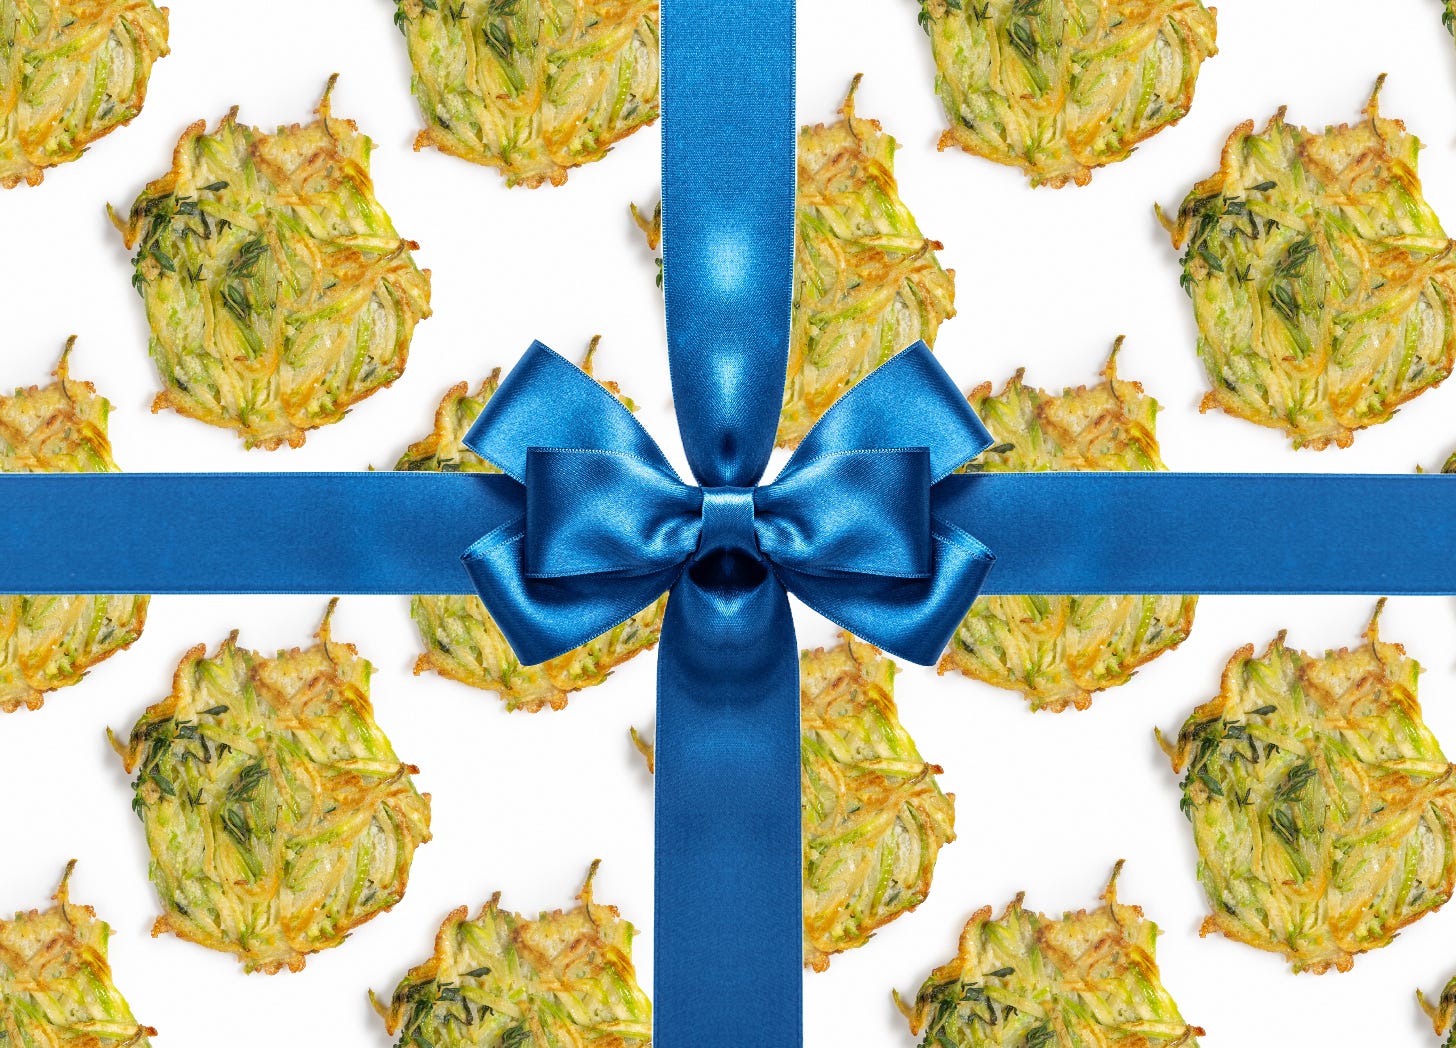 a repeating pattern of Hanukkah latkes wrapped by a blue bow, designed by Sam Zee